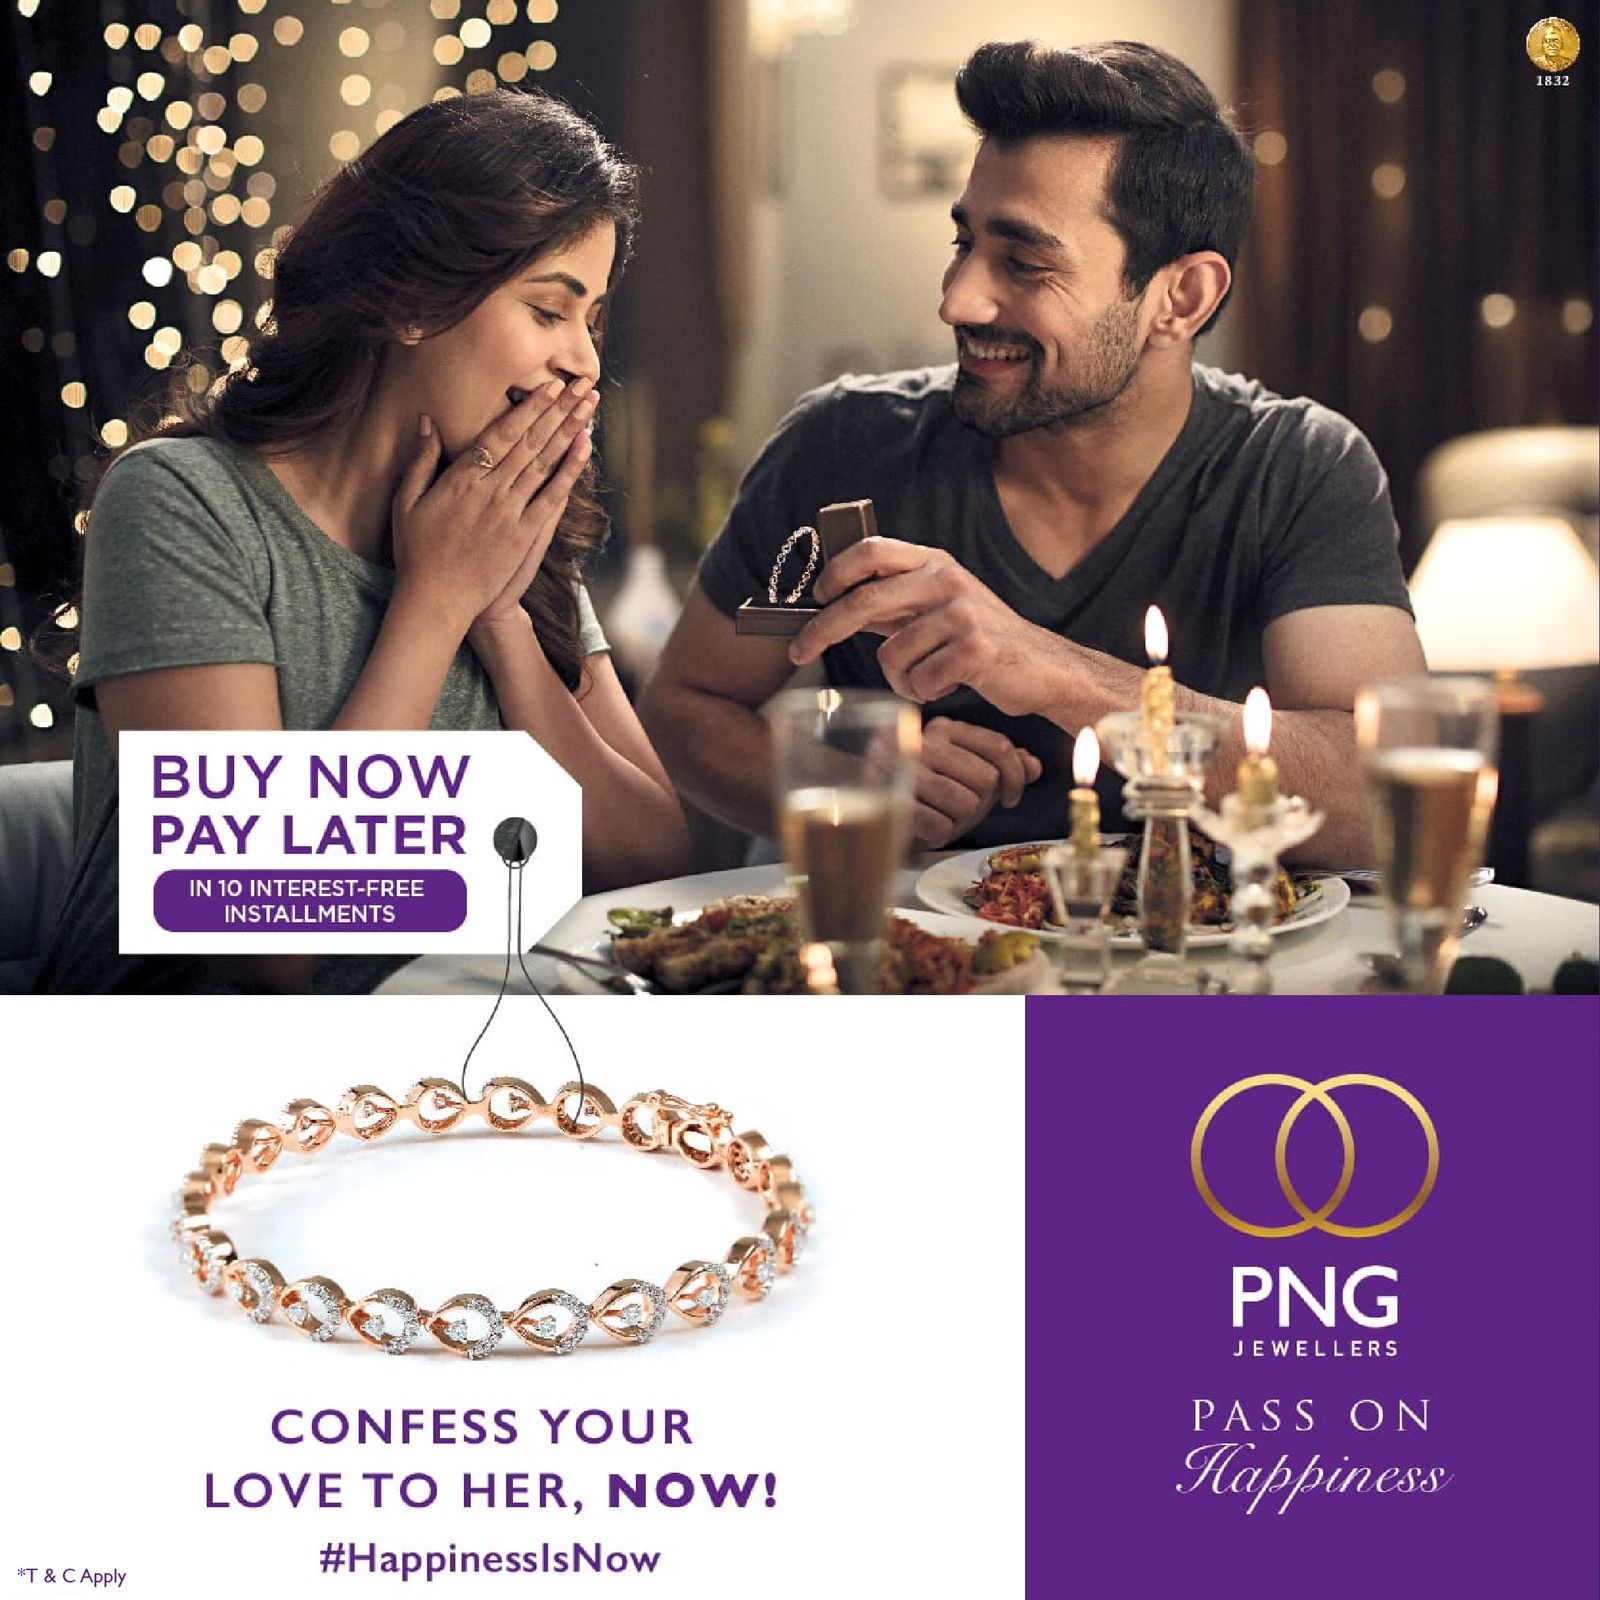 Buy Now, Pay Later is the new Happiness offering from PNG Jewellers